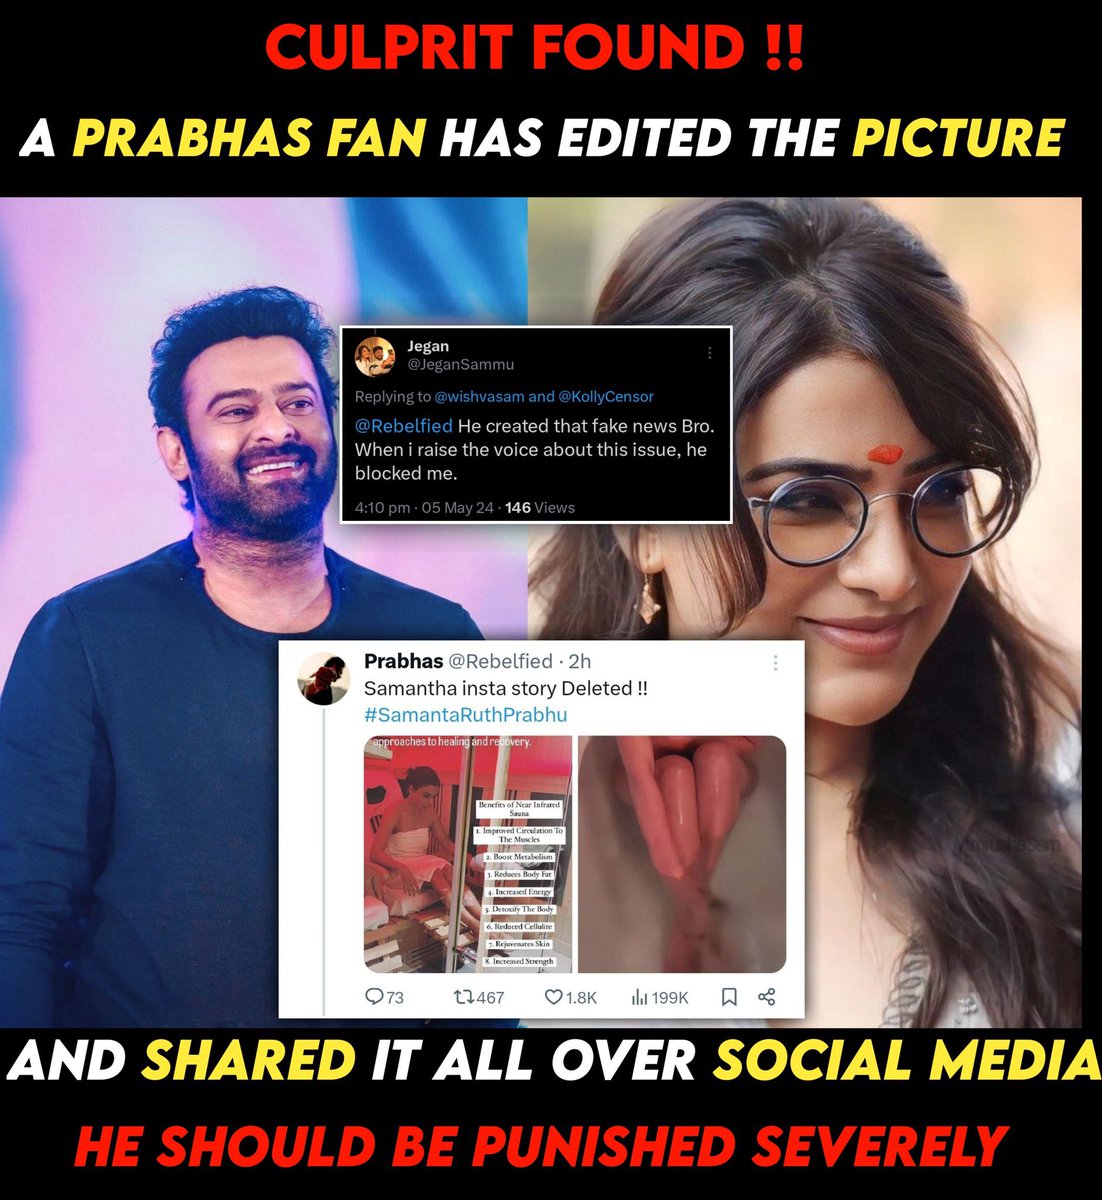 Exclusive news: It was #Prabhas fan who spread the fake news about #Samantha instagram story. Prabhas fans are the most toxic fans on social media and can go as low as possible to defame and spread negativity on any star. Samantha Ruth Prabhu official team has taken the…